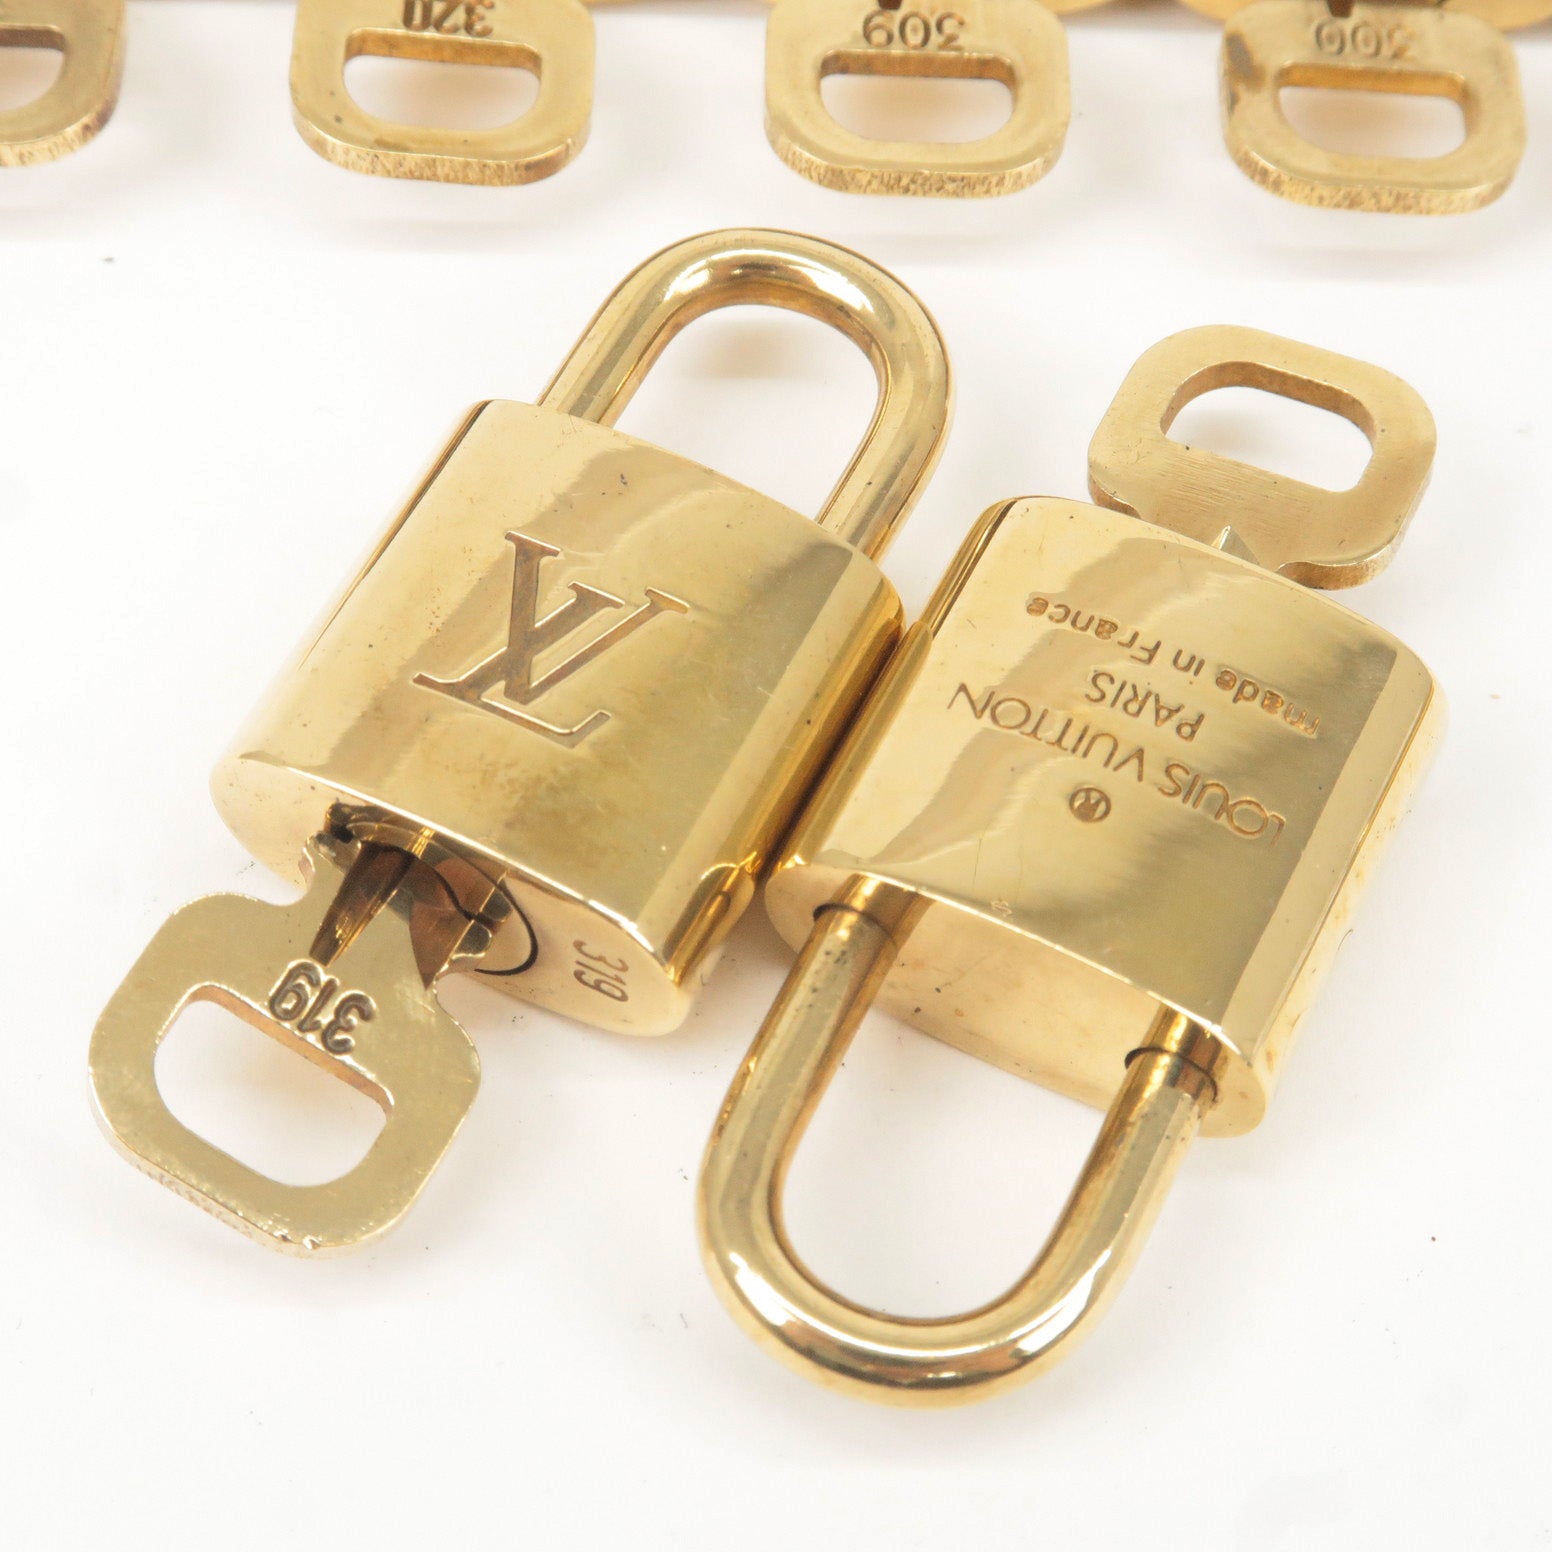 Louis Vuitton Two Padlocks and Keys 319 and 312 Lock Brass 